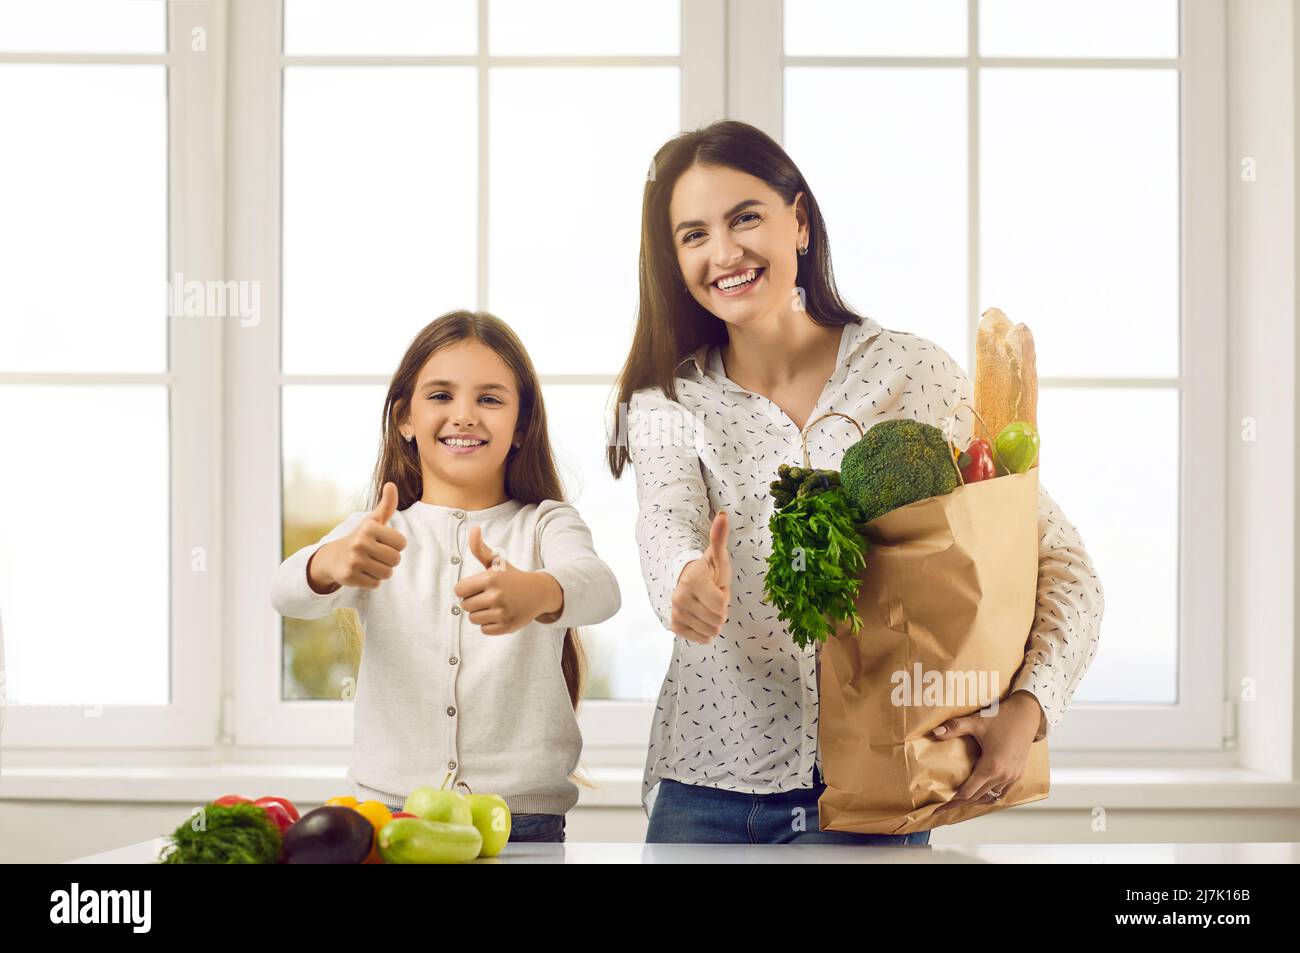 Healthy eco friendly family showing thumbs up holding grocery bag with fresh organic vegetables. Stock Photo